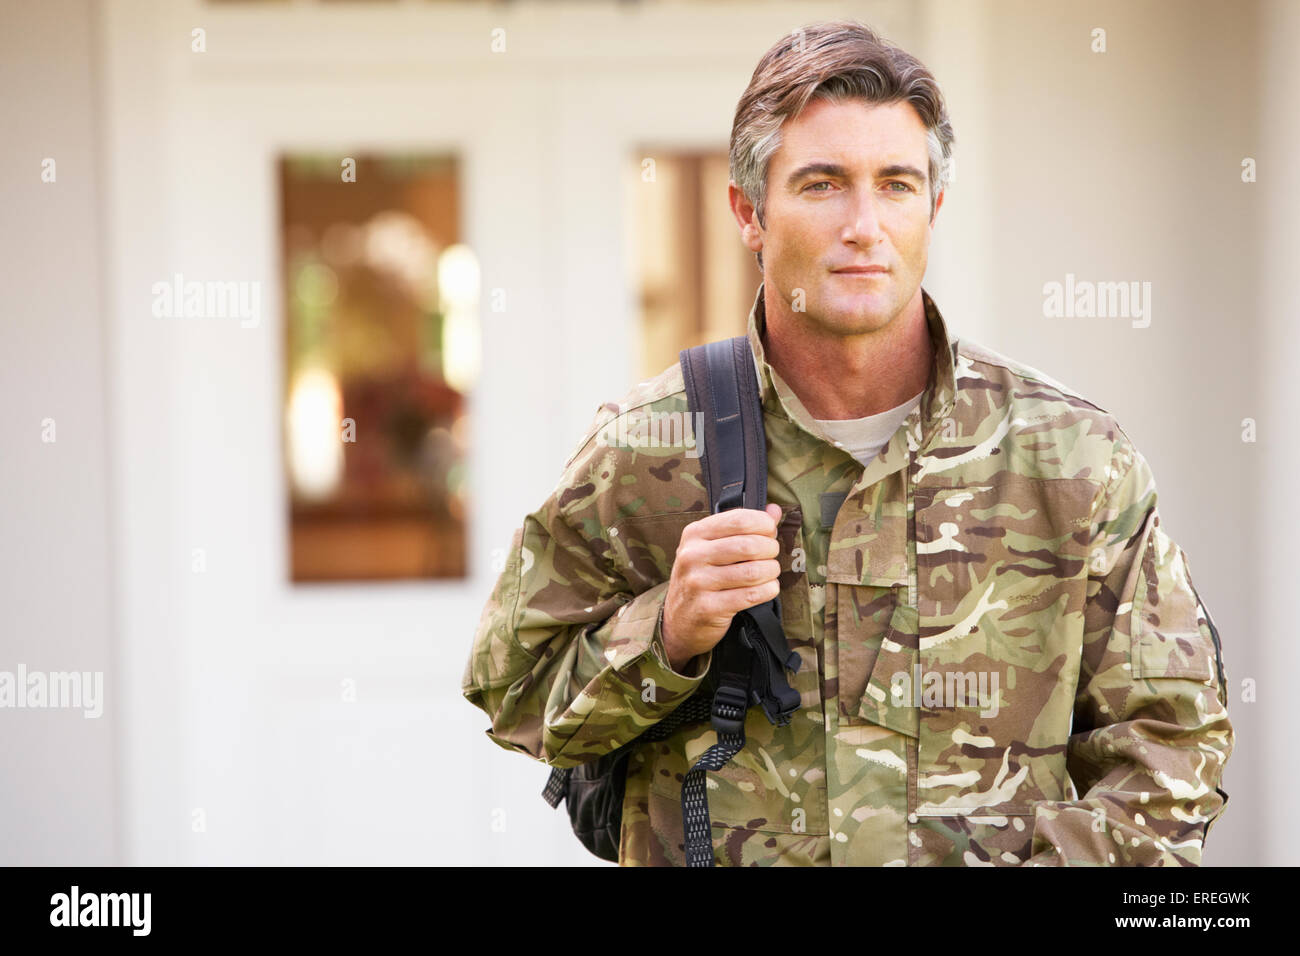 Soldier Returning To Unit After Home Leave Stock Photo